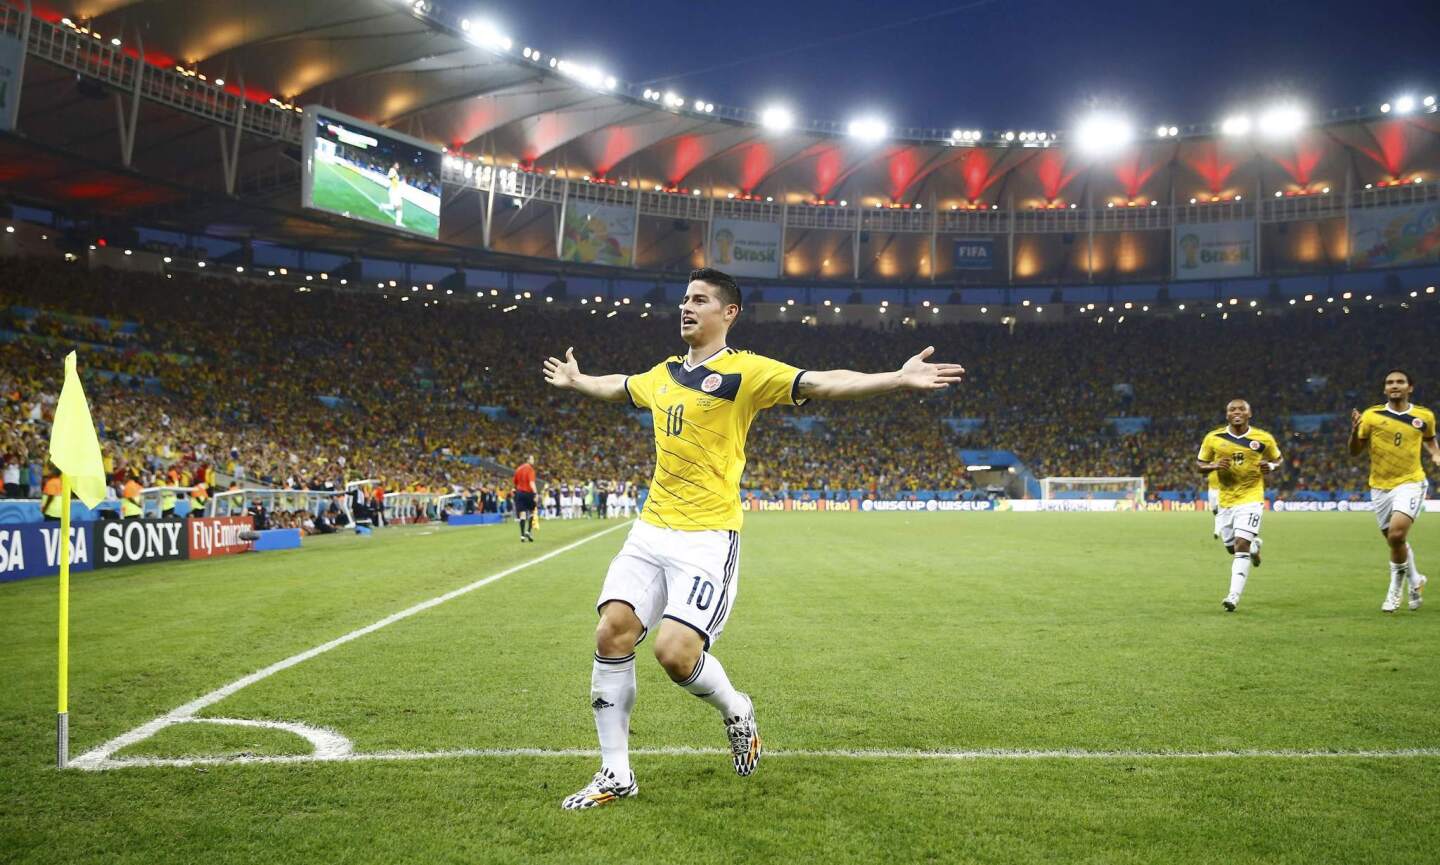 Colombia's Rodriguez celebrates his goal against Uruguay during their 2014 World Cup round of 16 game at the Maracana stadium in Rio de Janeiro